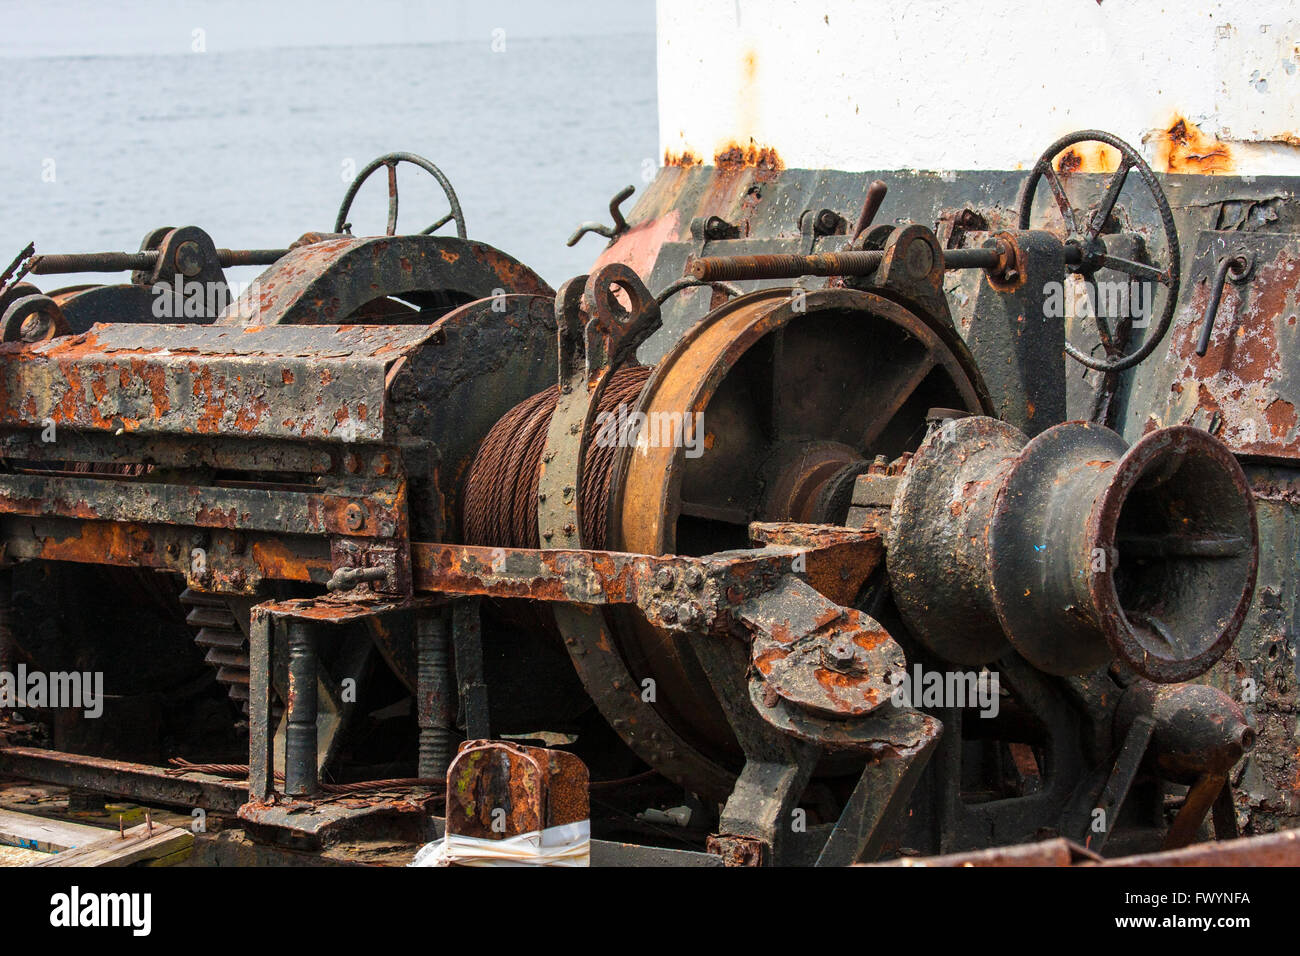 Old rusty machinery on a fishing boat, elapsed time Stock Photo